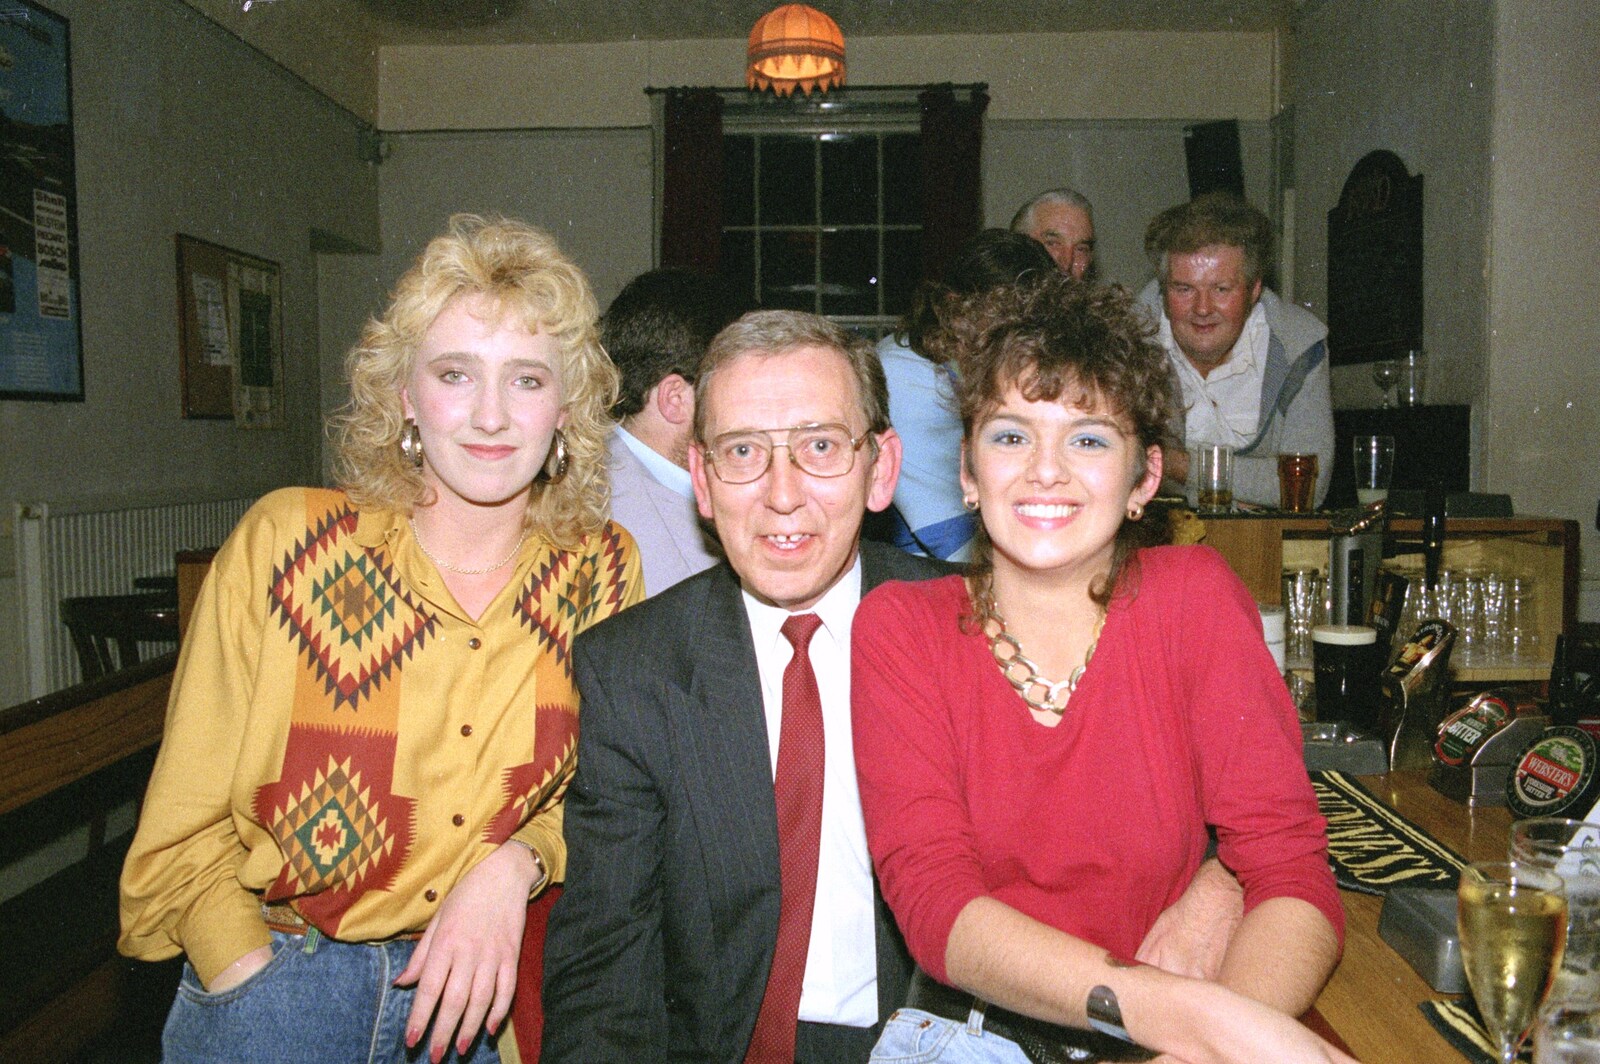 Kate, Adrian Lavall and Rachel, in the Railway Tavern from Croquet, and Printec at the Railway Tavern, Stuston and Diss - 30th September 1990